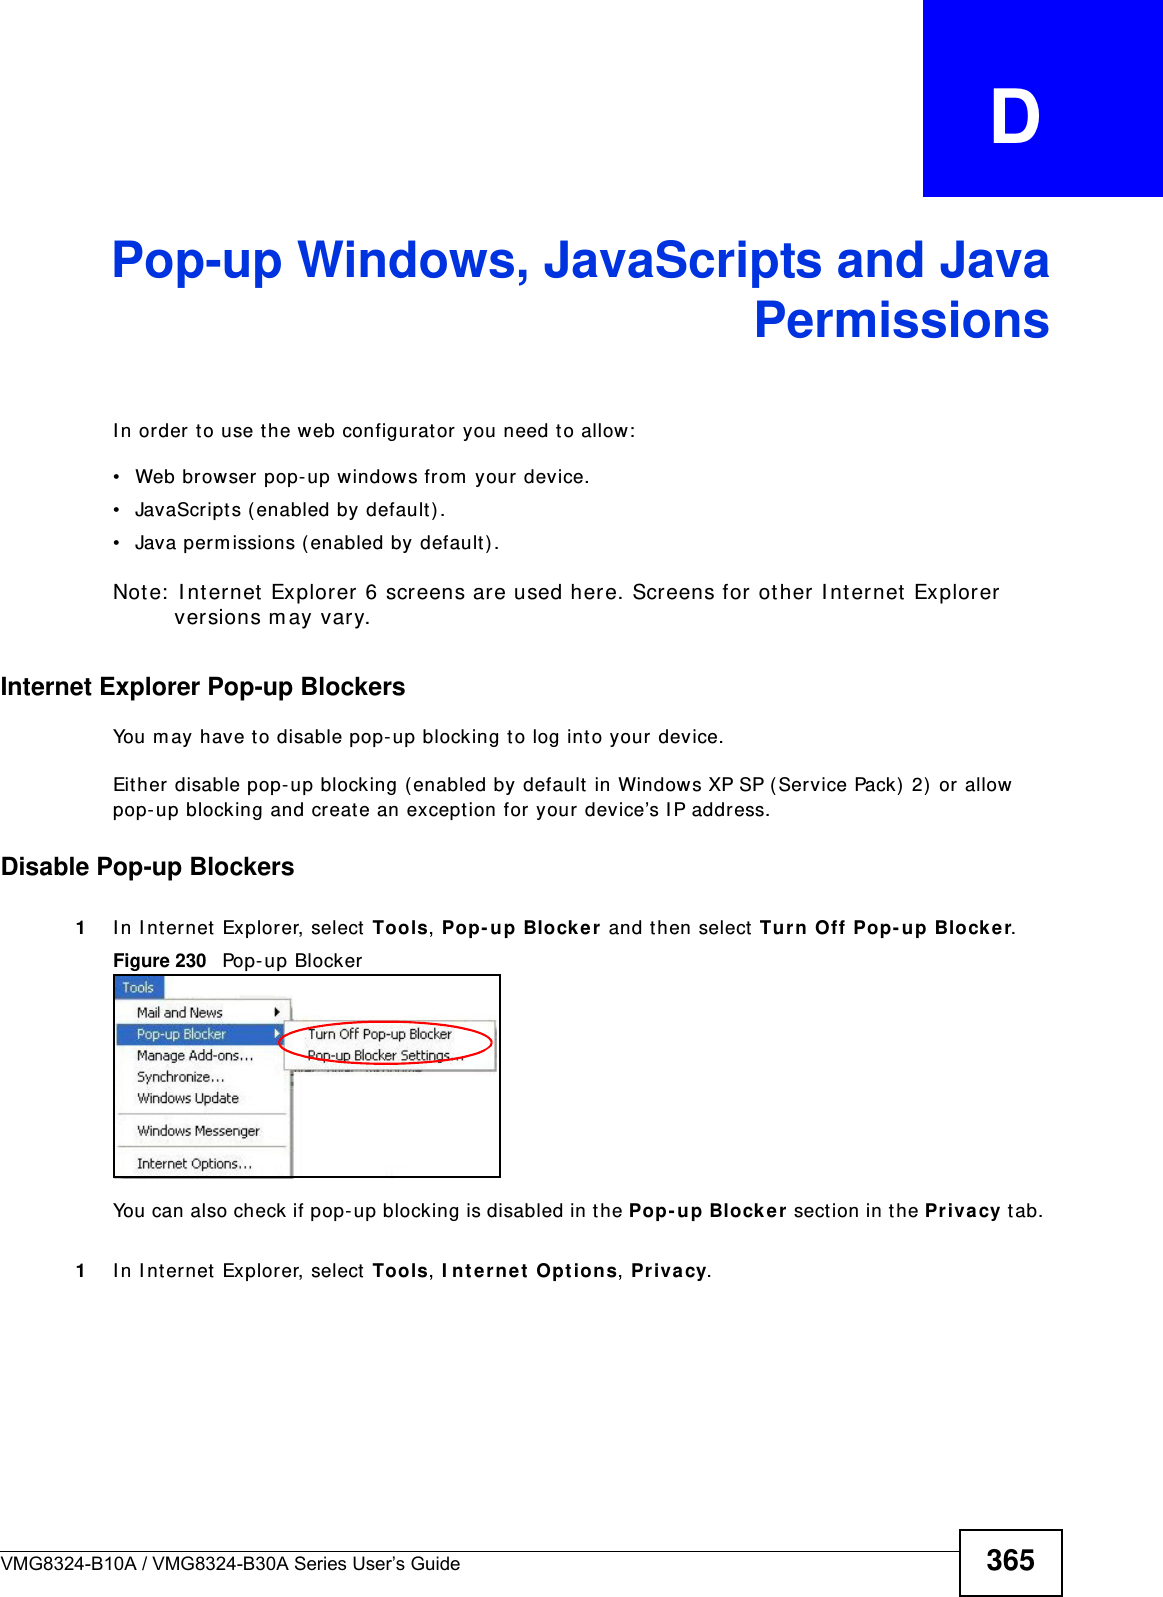 VMG8324-B10A / VMG8324-B30A Series User’s Guide 365APPENDIX   DPop-up Windows, JavaScripts and JavaPermissionsI n order t o use the web configurator you need t o allow:• Web browser pop- up windows from  your device.• JavaScripts ( enabled by default) .• Java perm issions ( enabled by default ).Note:  I nternet  Explorer 6 screens are used here. Screens for ot her I nternet Explorer ver sions m ay  vary.Internet Explorer Pop-up BlockersYou m ay have t o disable pop- up blocking t o log int o your device. Eit her  disable pop- up blocking ( enabled by default in Windows XP SP (Service Pack) 2) or allow pop- up blocking and creat e an exception for your device’s I P address.Disable Pop-up Blockers1I n I nternet Explorer, select  Tools, Pop- up Blocke r and t hen select  Tur n Off Pop- up Blocke r. Figure 230   Pop- up BlockerYou can also check if pop- up blocking is disabled in the Pop- up Blocke r sect ion in the Privacy t ab. 1I n I nternet Explorer, select  Tools, I nter net Opt ions, Privacy.